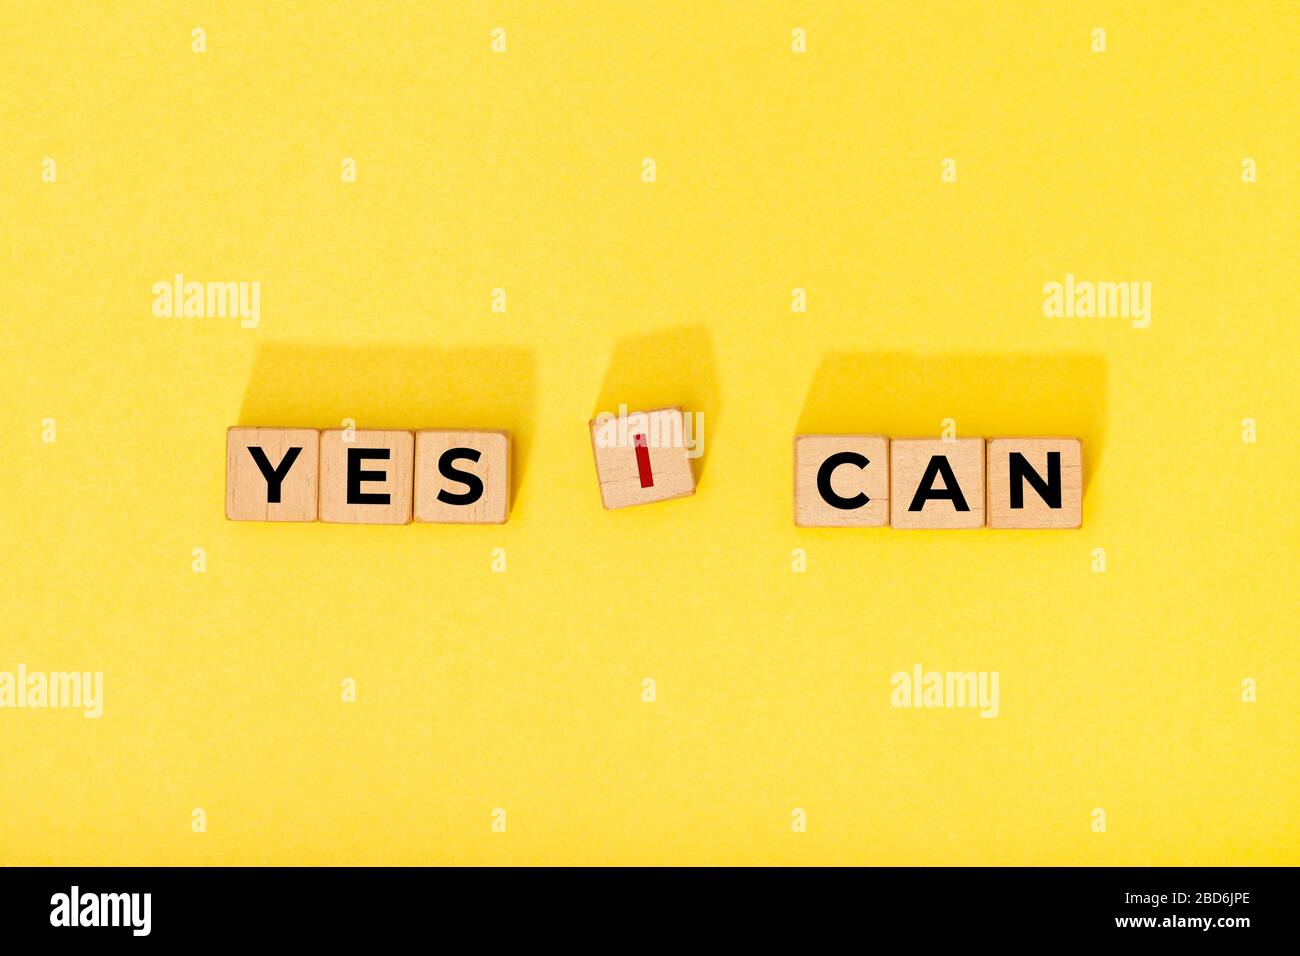 Yes I can message on wooden blocks. Motivational Words Quotes Concept Stock Photo